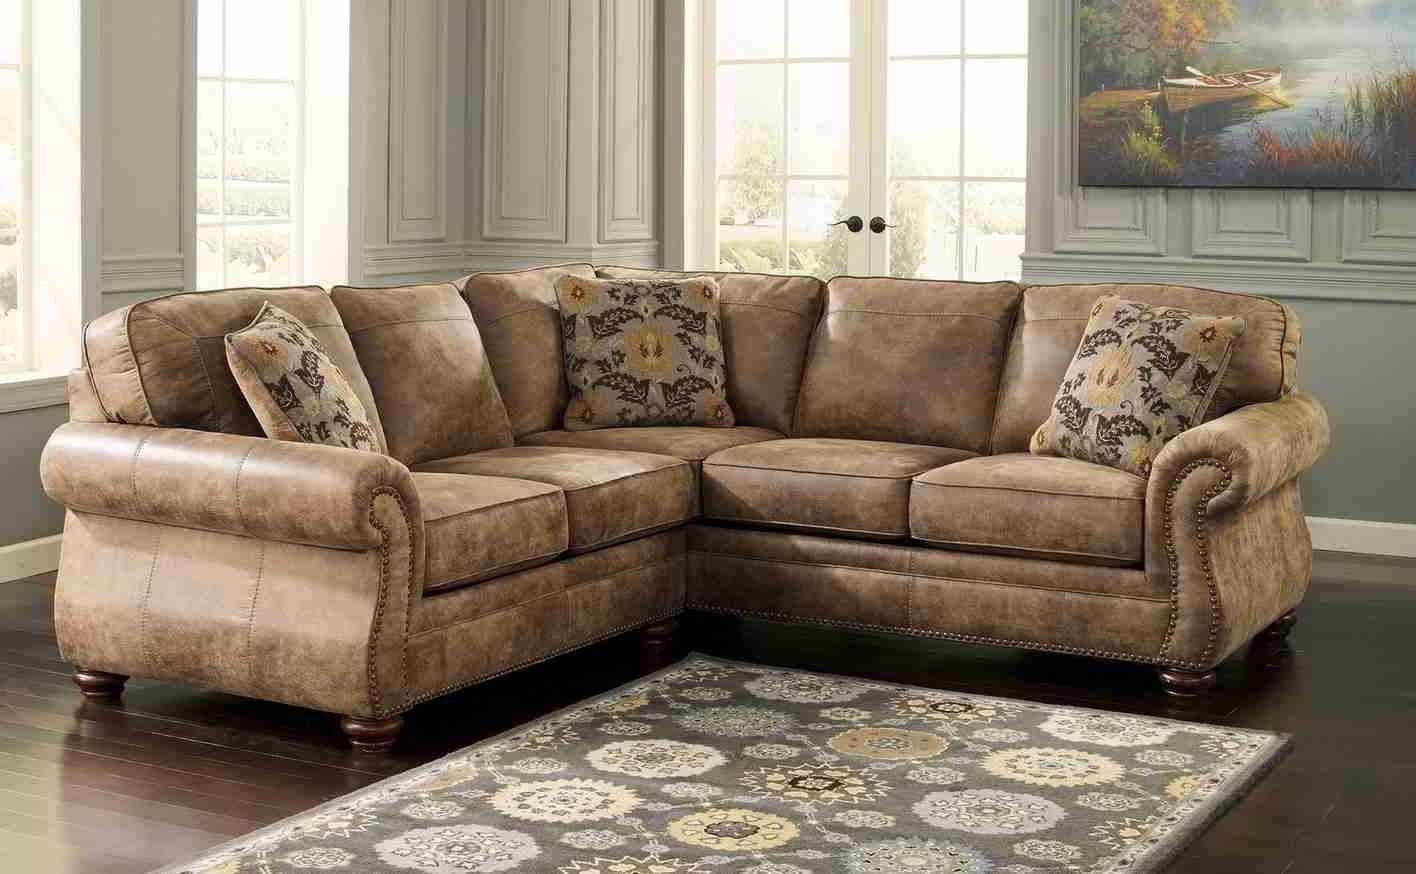 Sofas Center : Rustic Sectional Sofas With Recliners Best Home In Rustic Sectional Sofas (View 2 of 15)